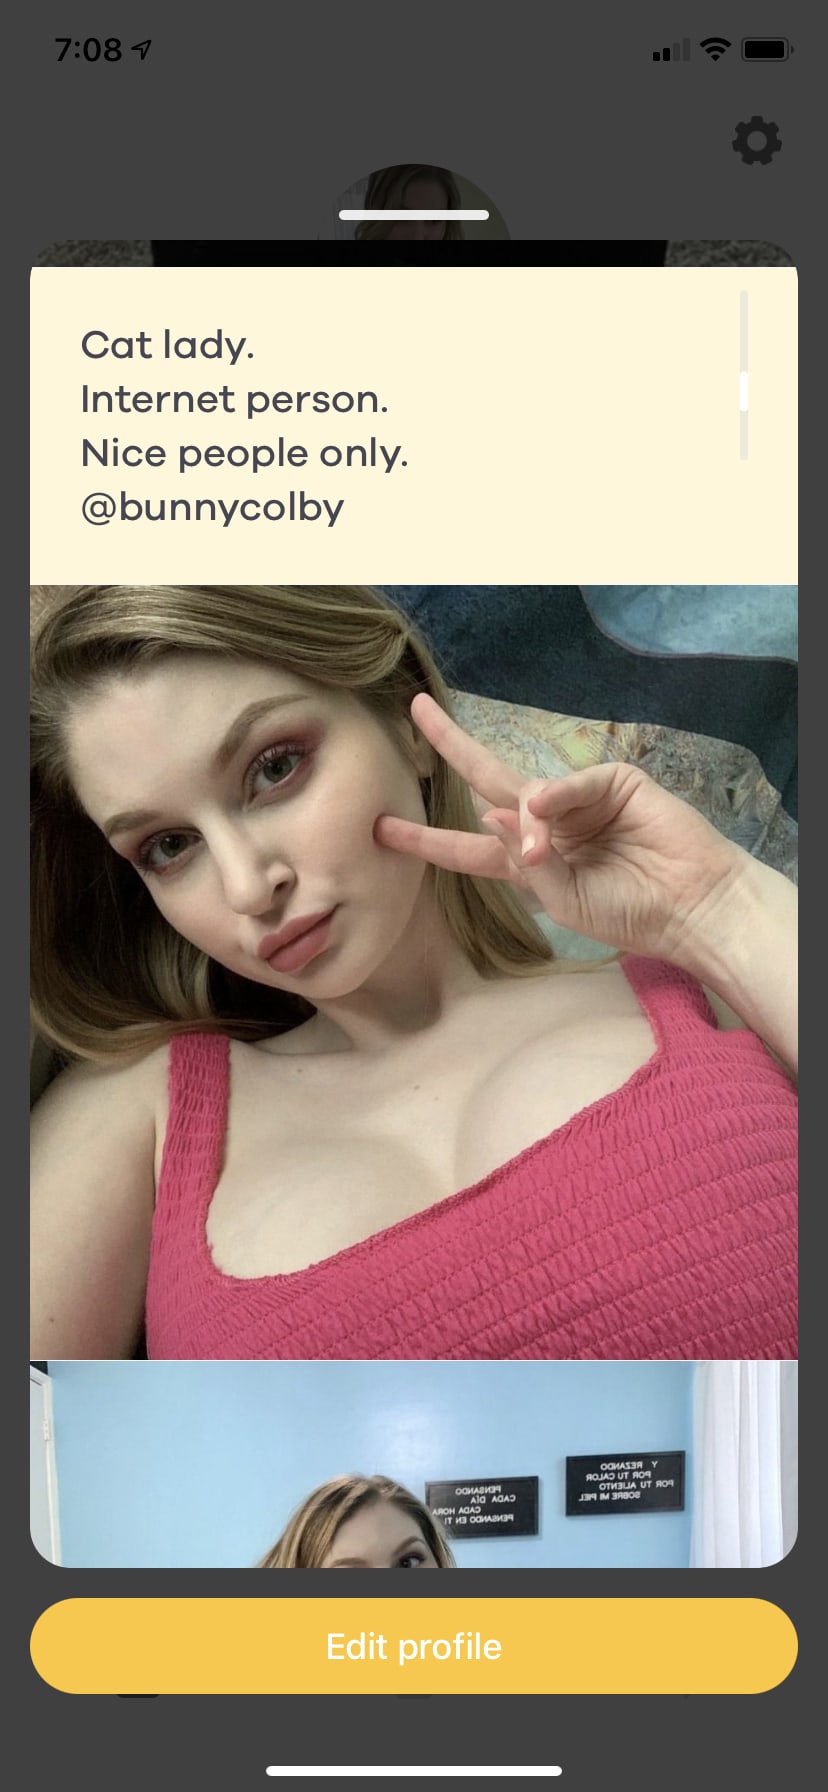 She Was Booted From Bumble for Being a Porn Star